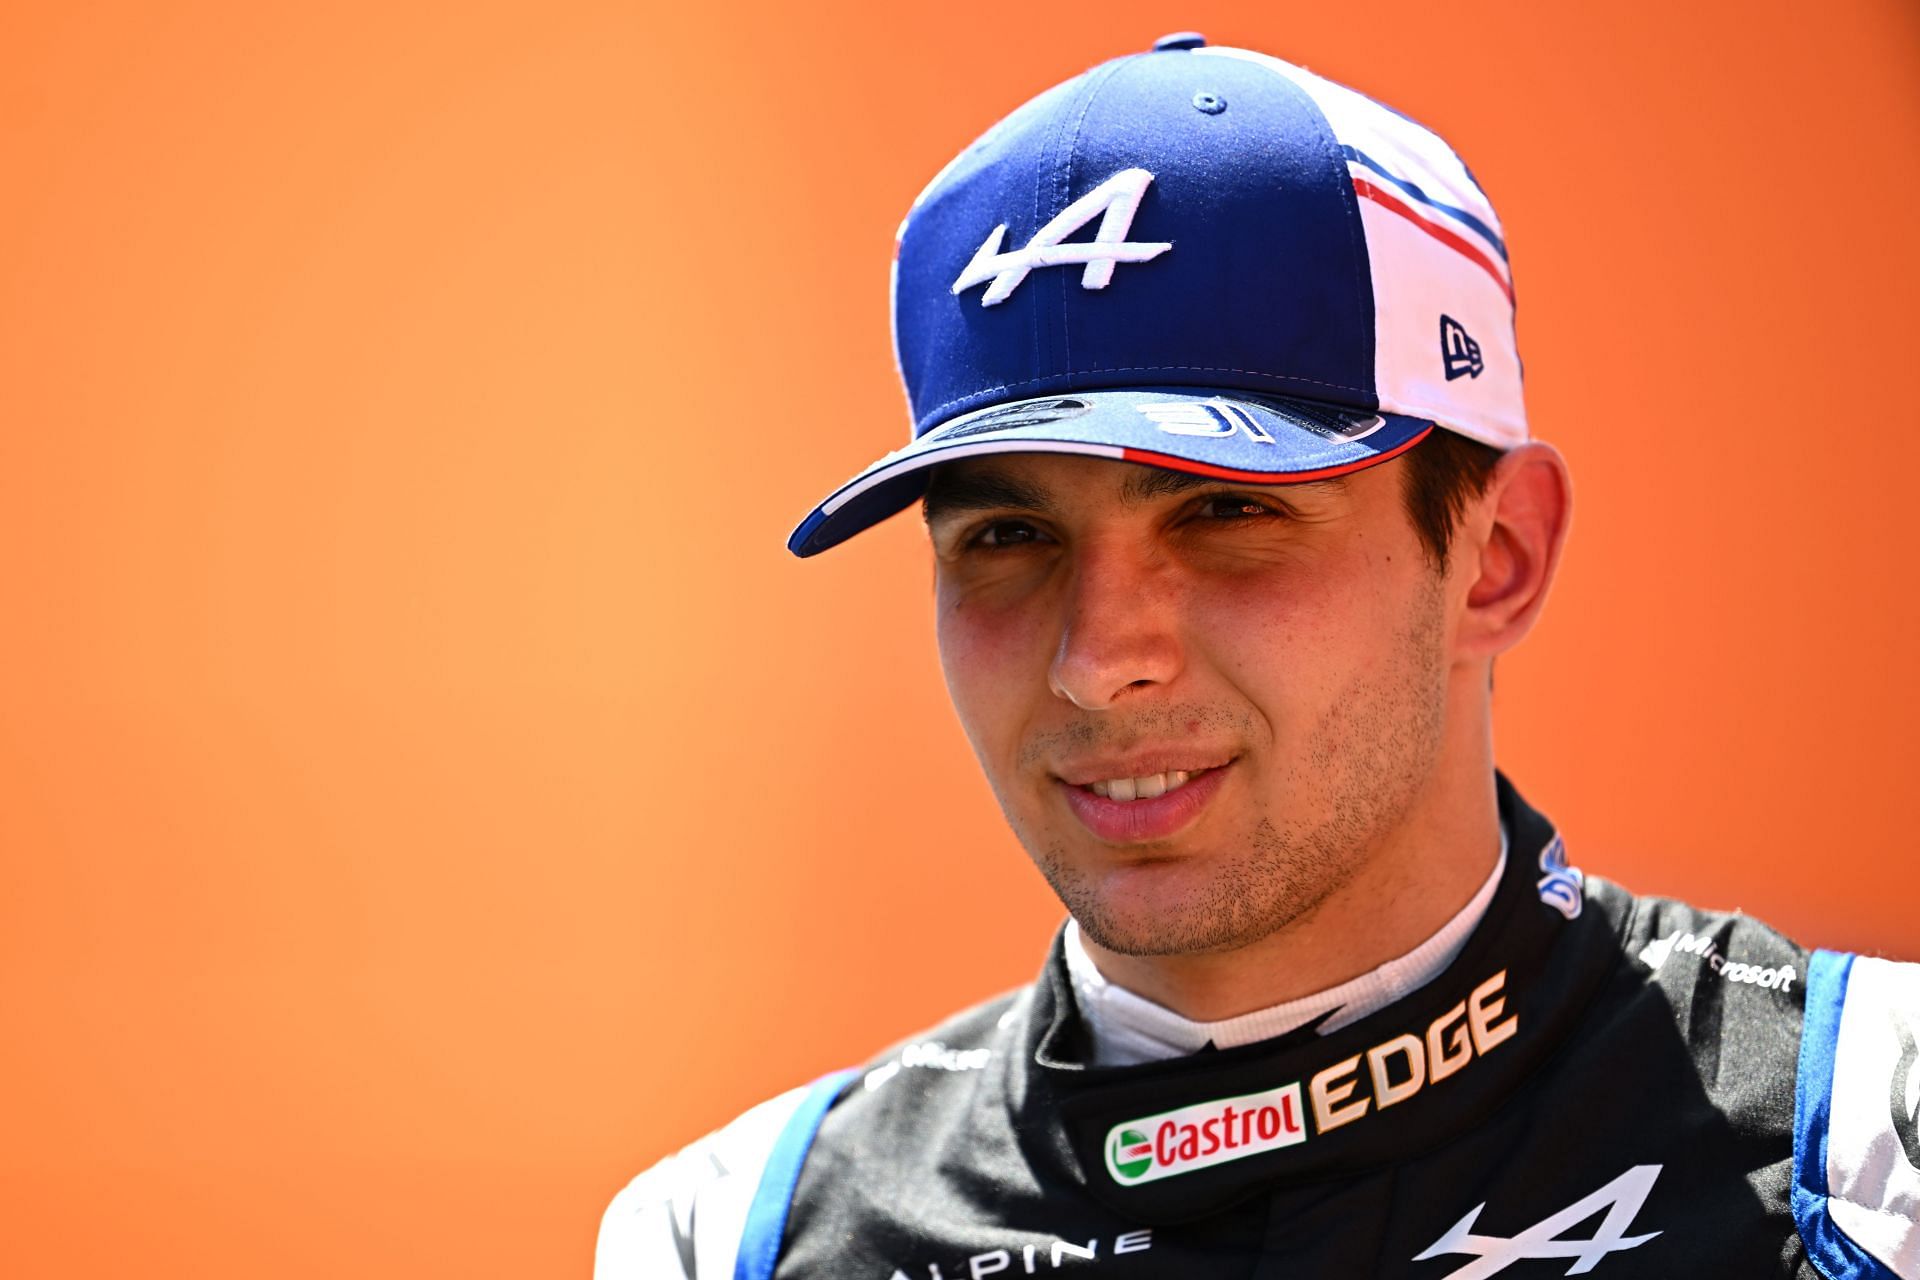 Esteban Ocon had to take a very tough road to return to F1 in 2019